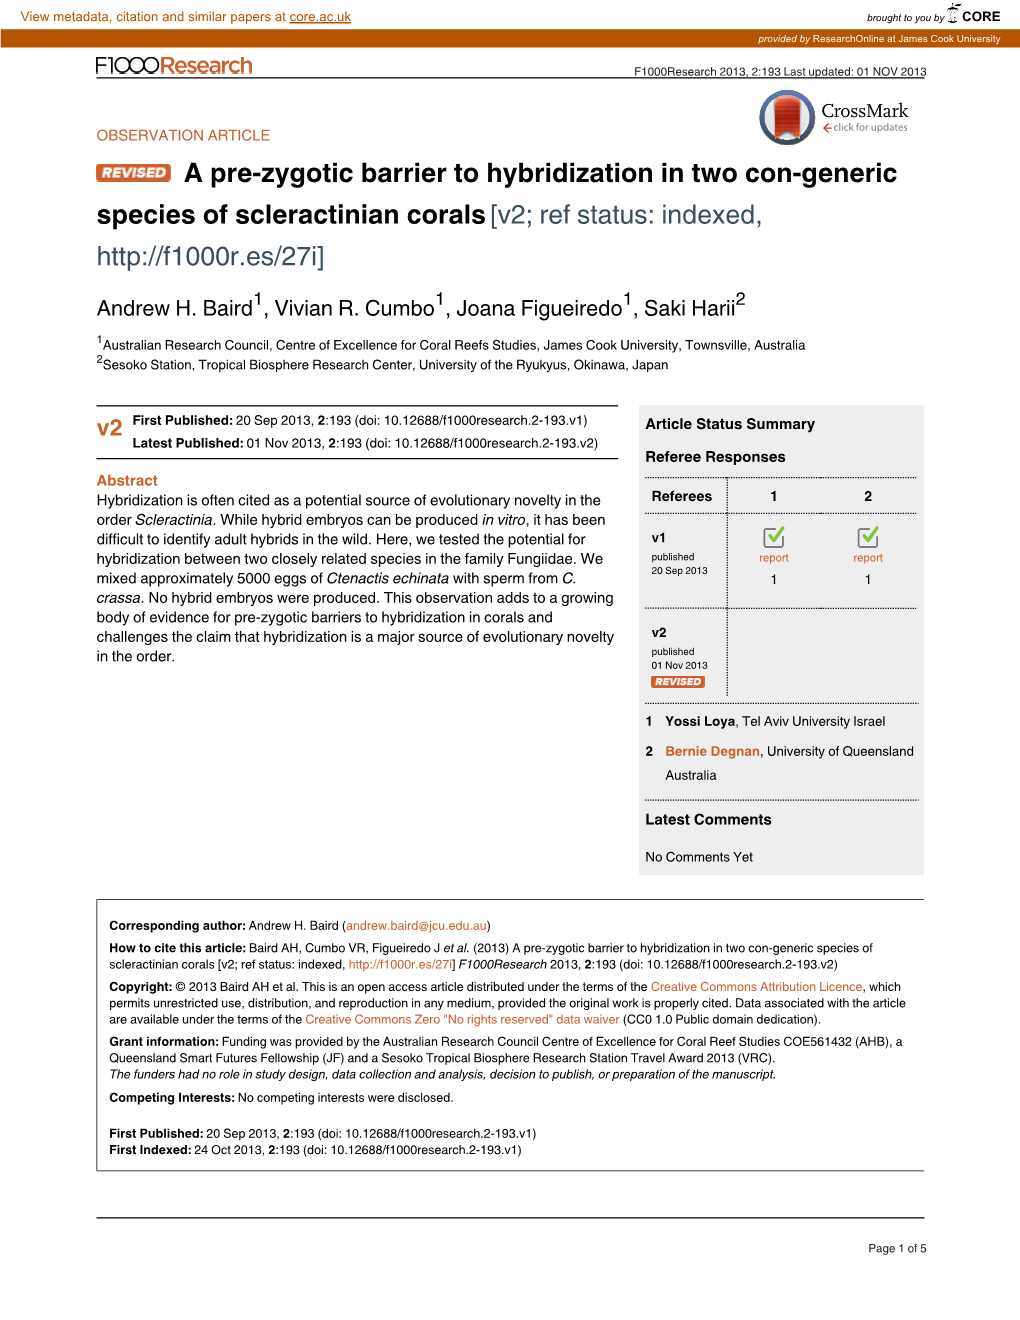 A Pre-Zygotic Barrier to Hybridization in Two Con-Generic Species of Scleractinian Corals[V2; Ref Status: Indexed